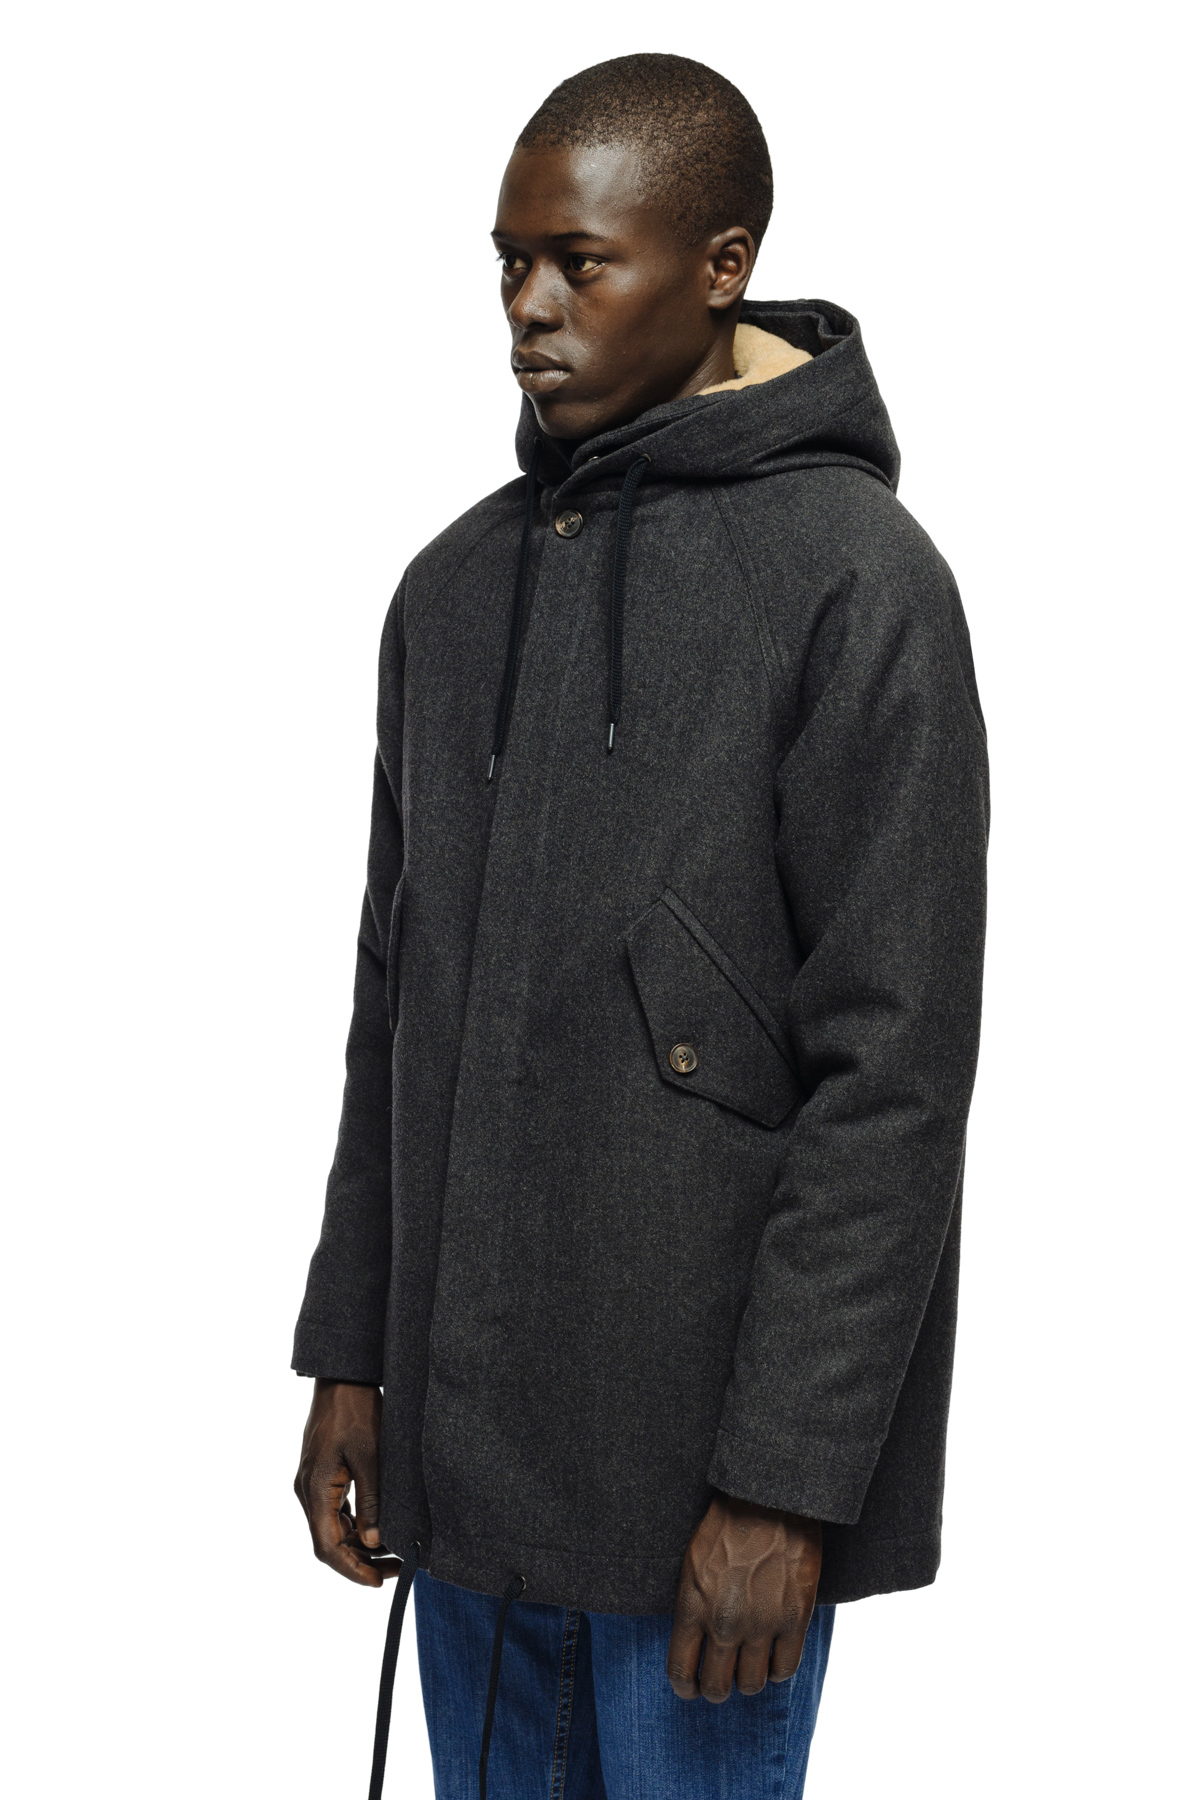 Derbeville test coal Every week A KIND OF GUISE "BUG" PARKA — NEWDOPENOW